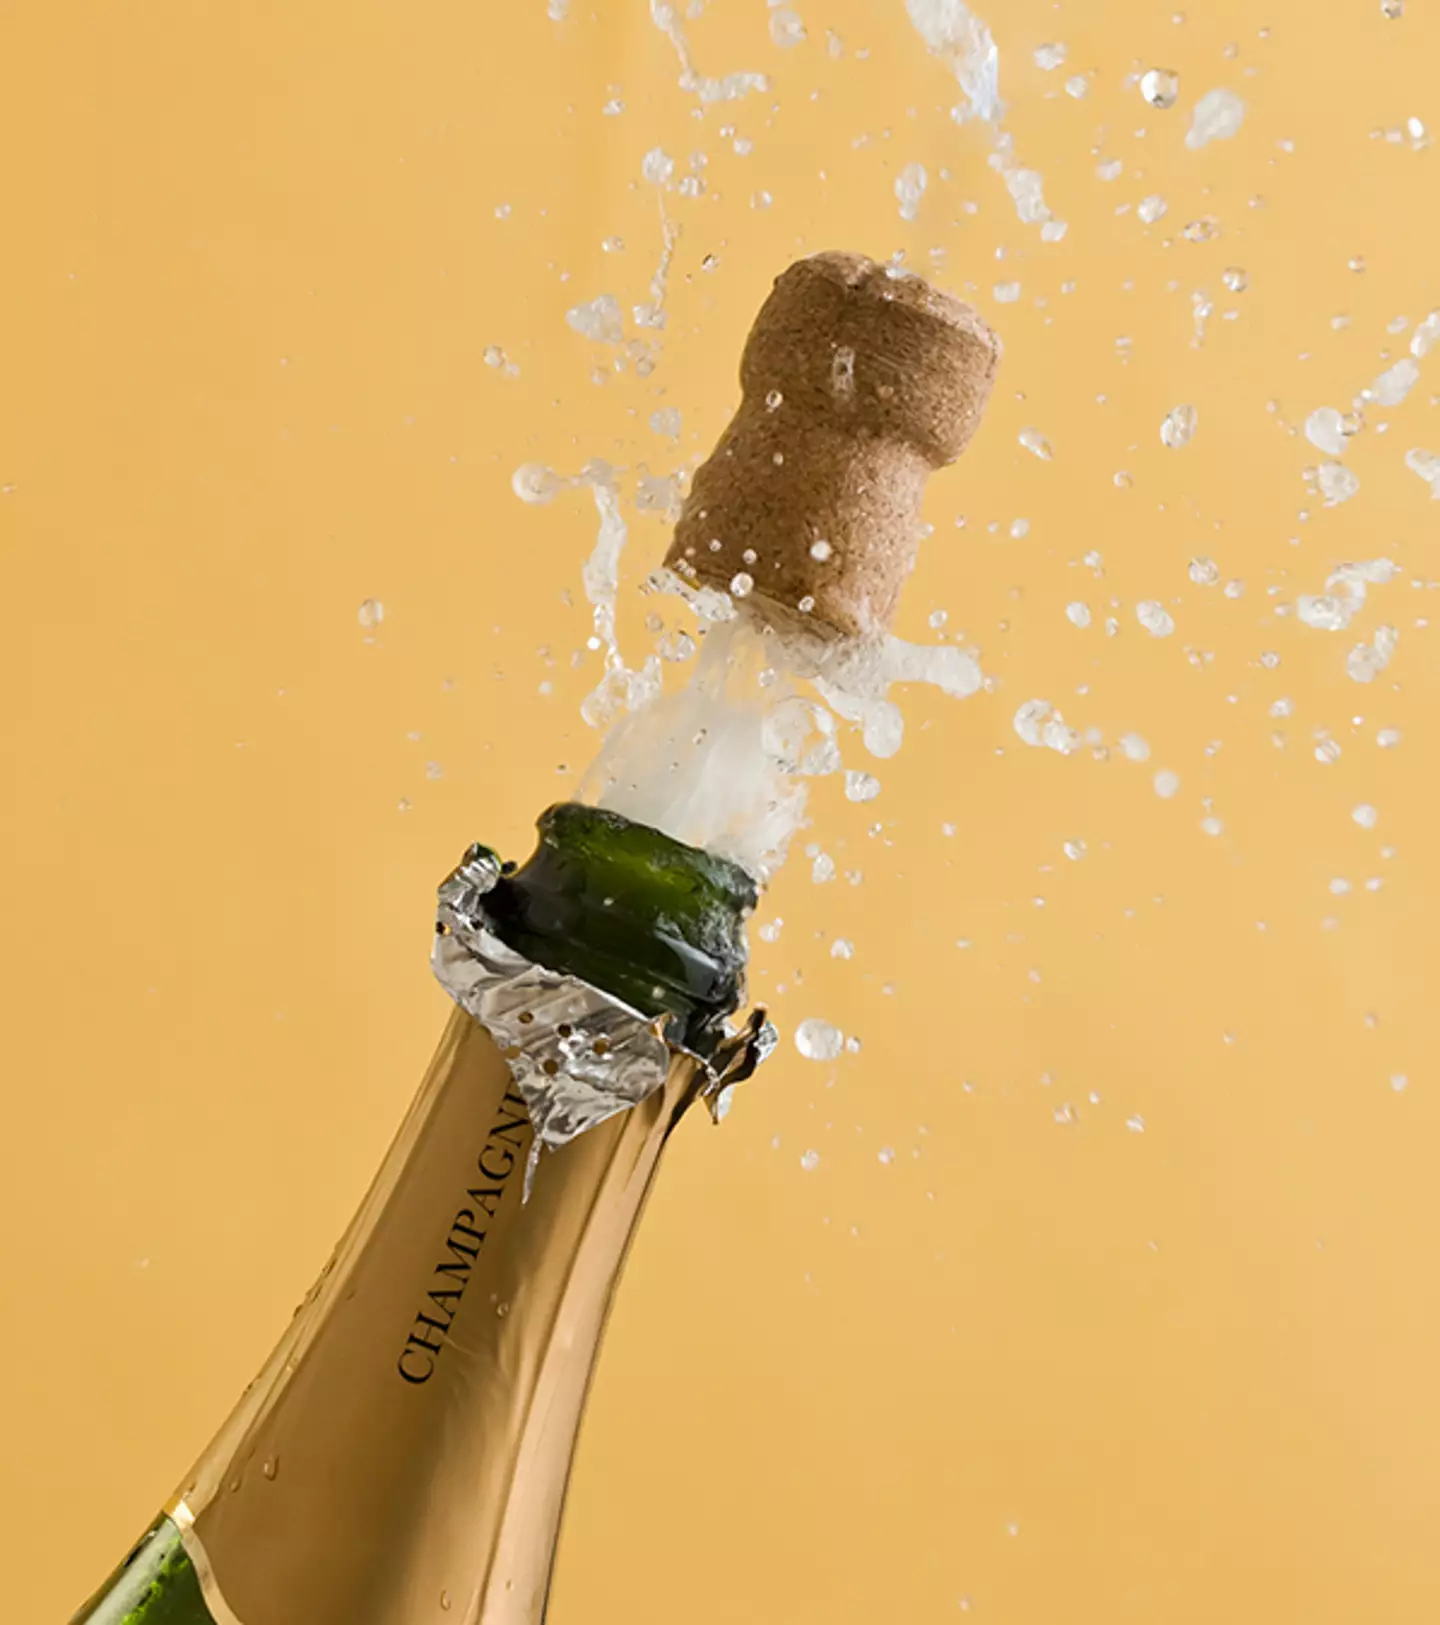 The Physics Behind Popping Champagne Bottles